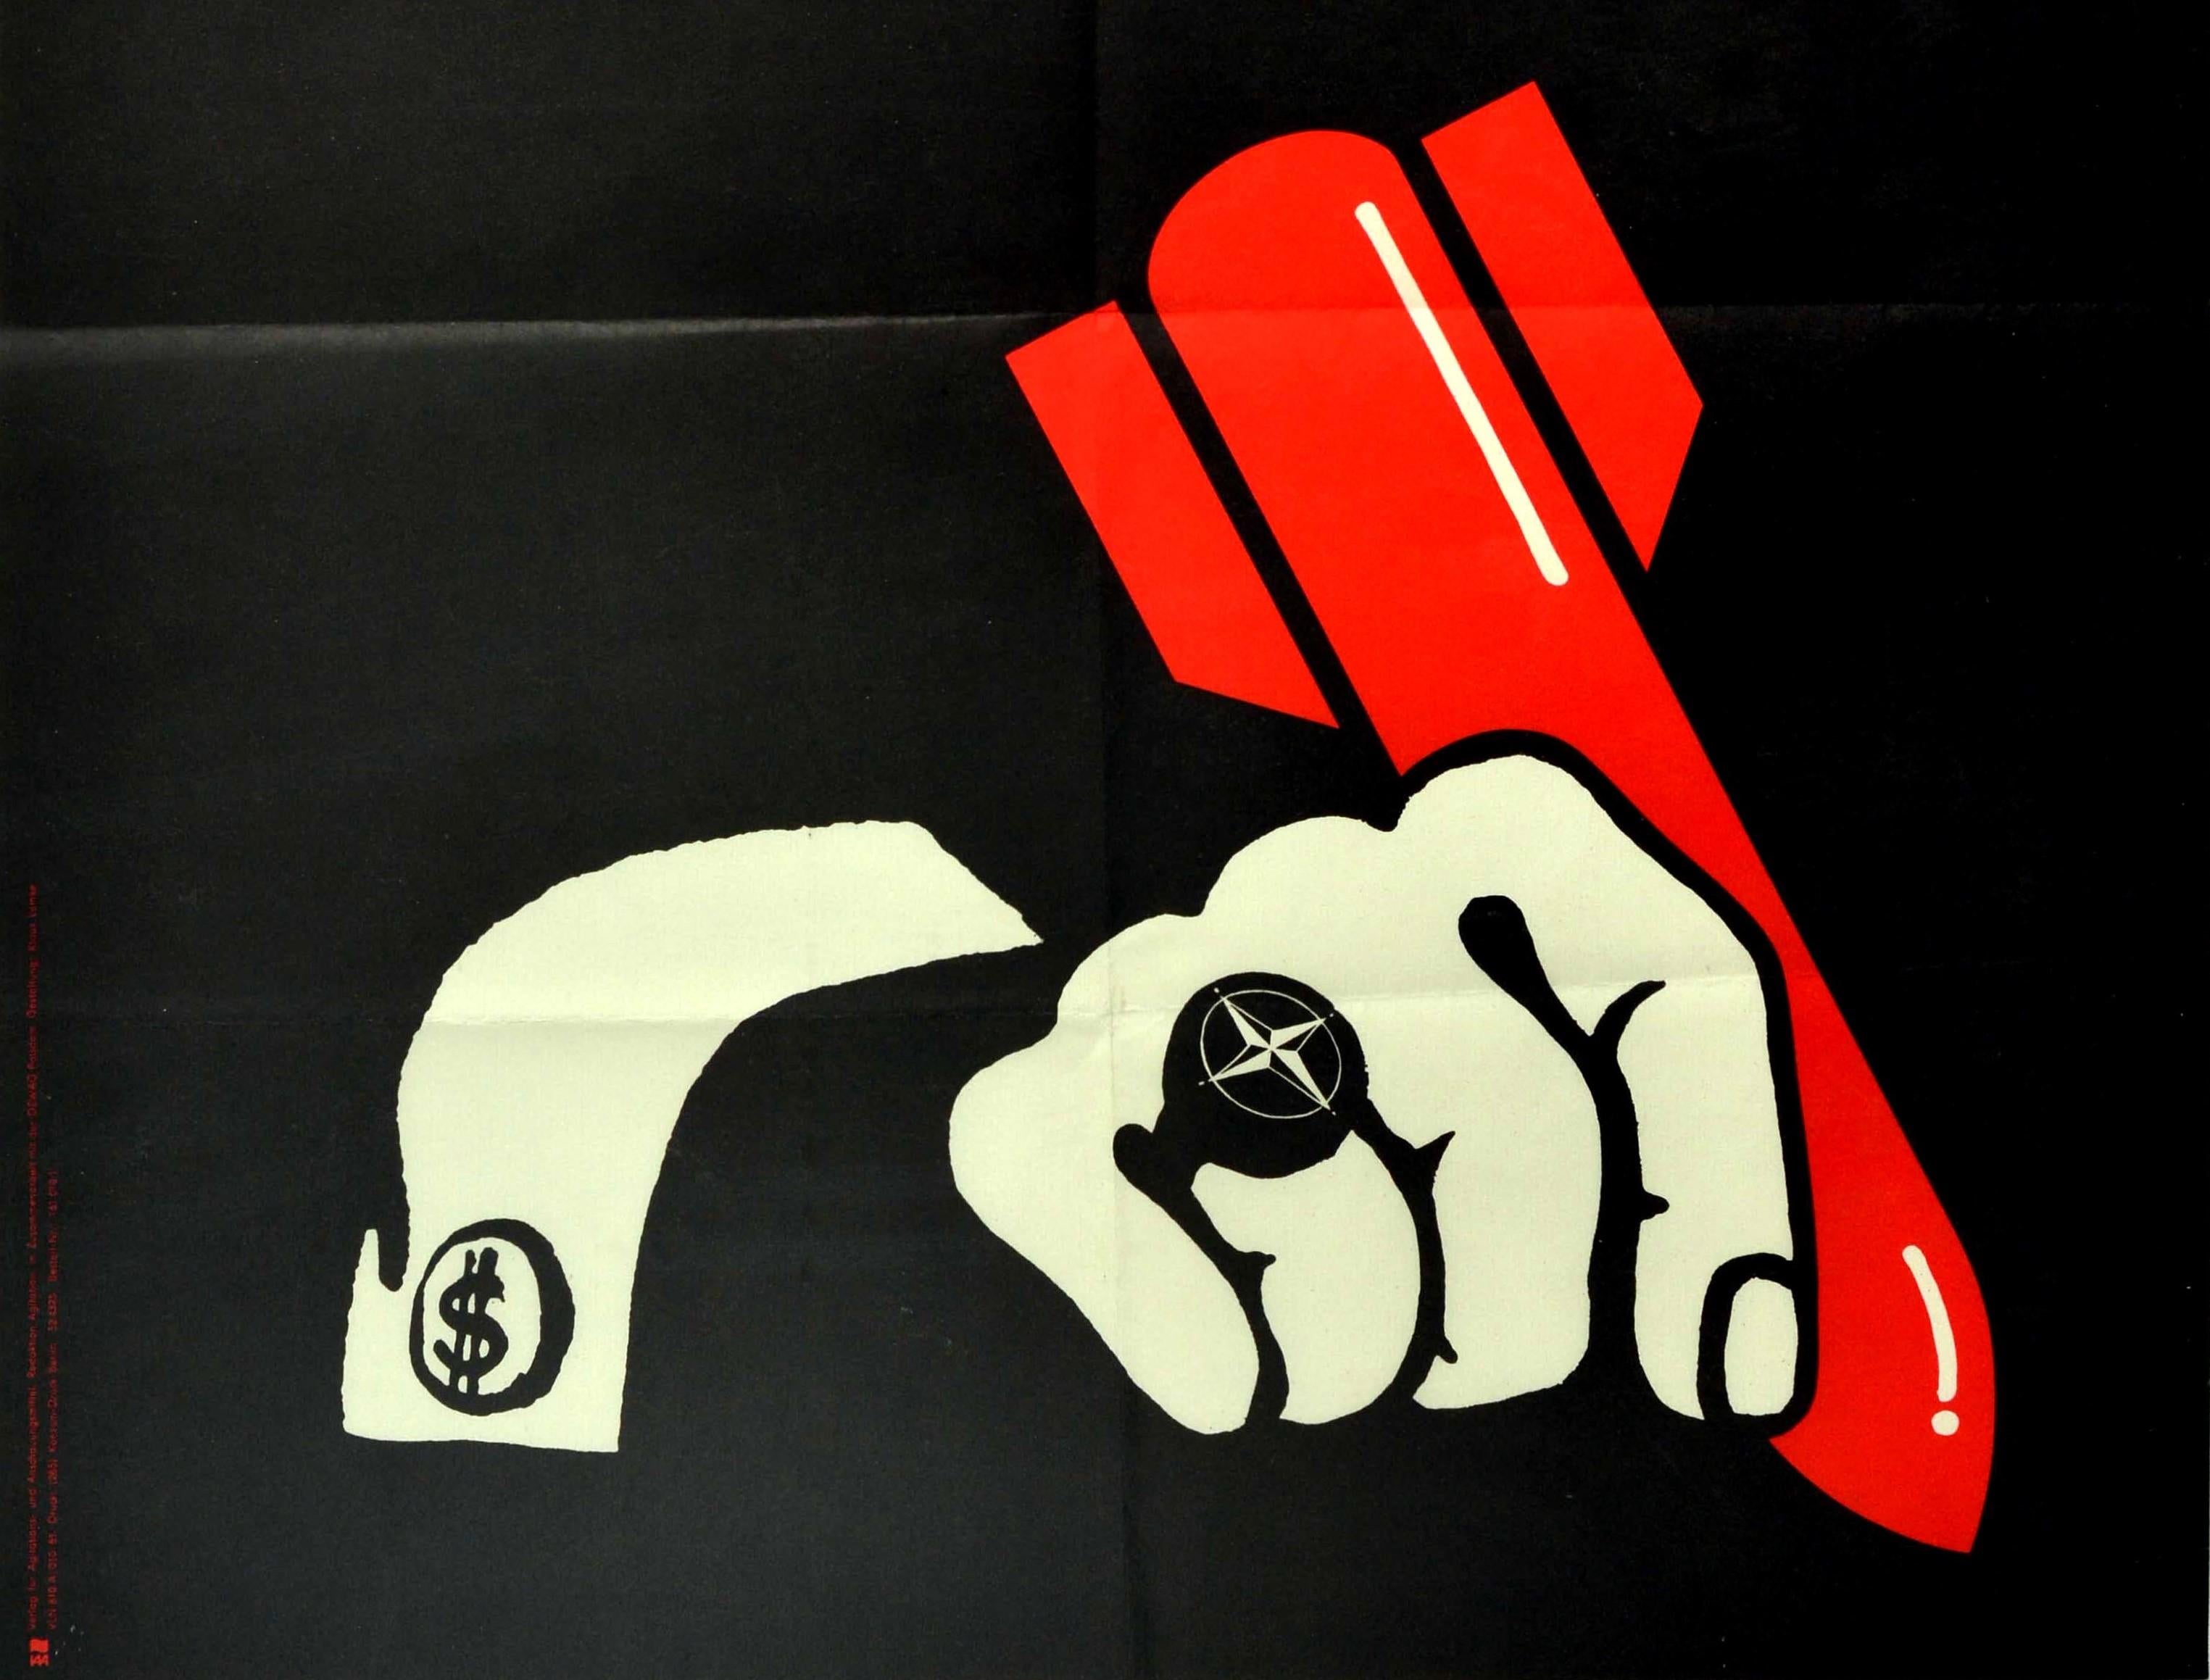 Original vintage political propaganda poster published in the German Democratic Republic - Die im dunkeln sieht man doch! You can see those in the dark! - featuring a dark background with a white hand wearing a ring marked with the NATO compass